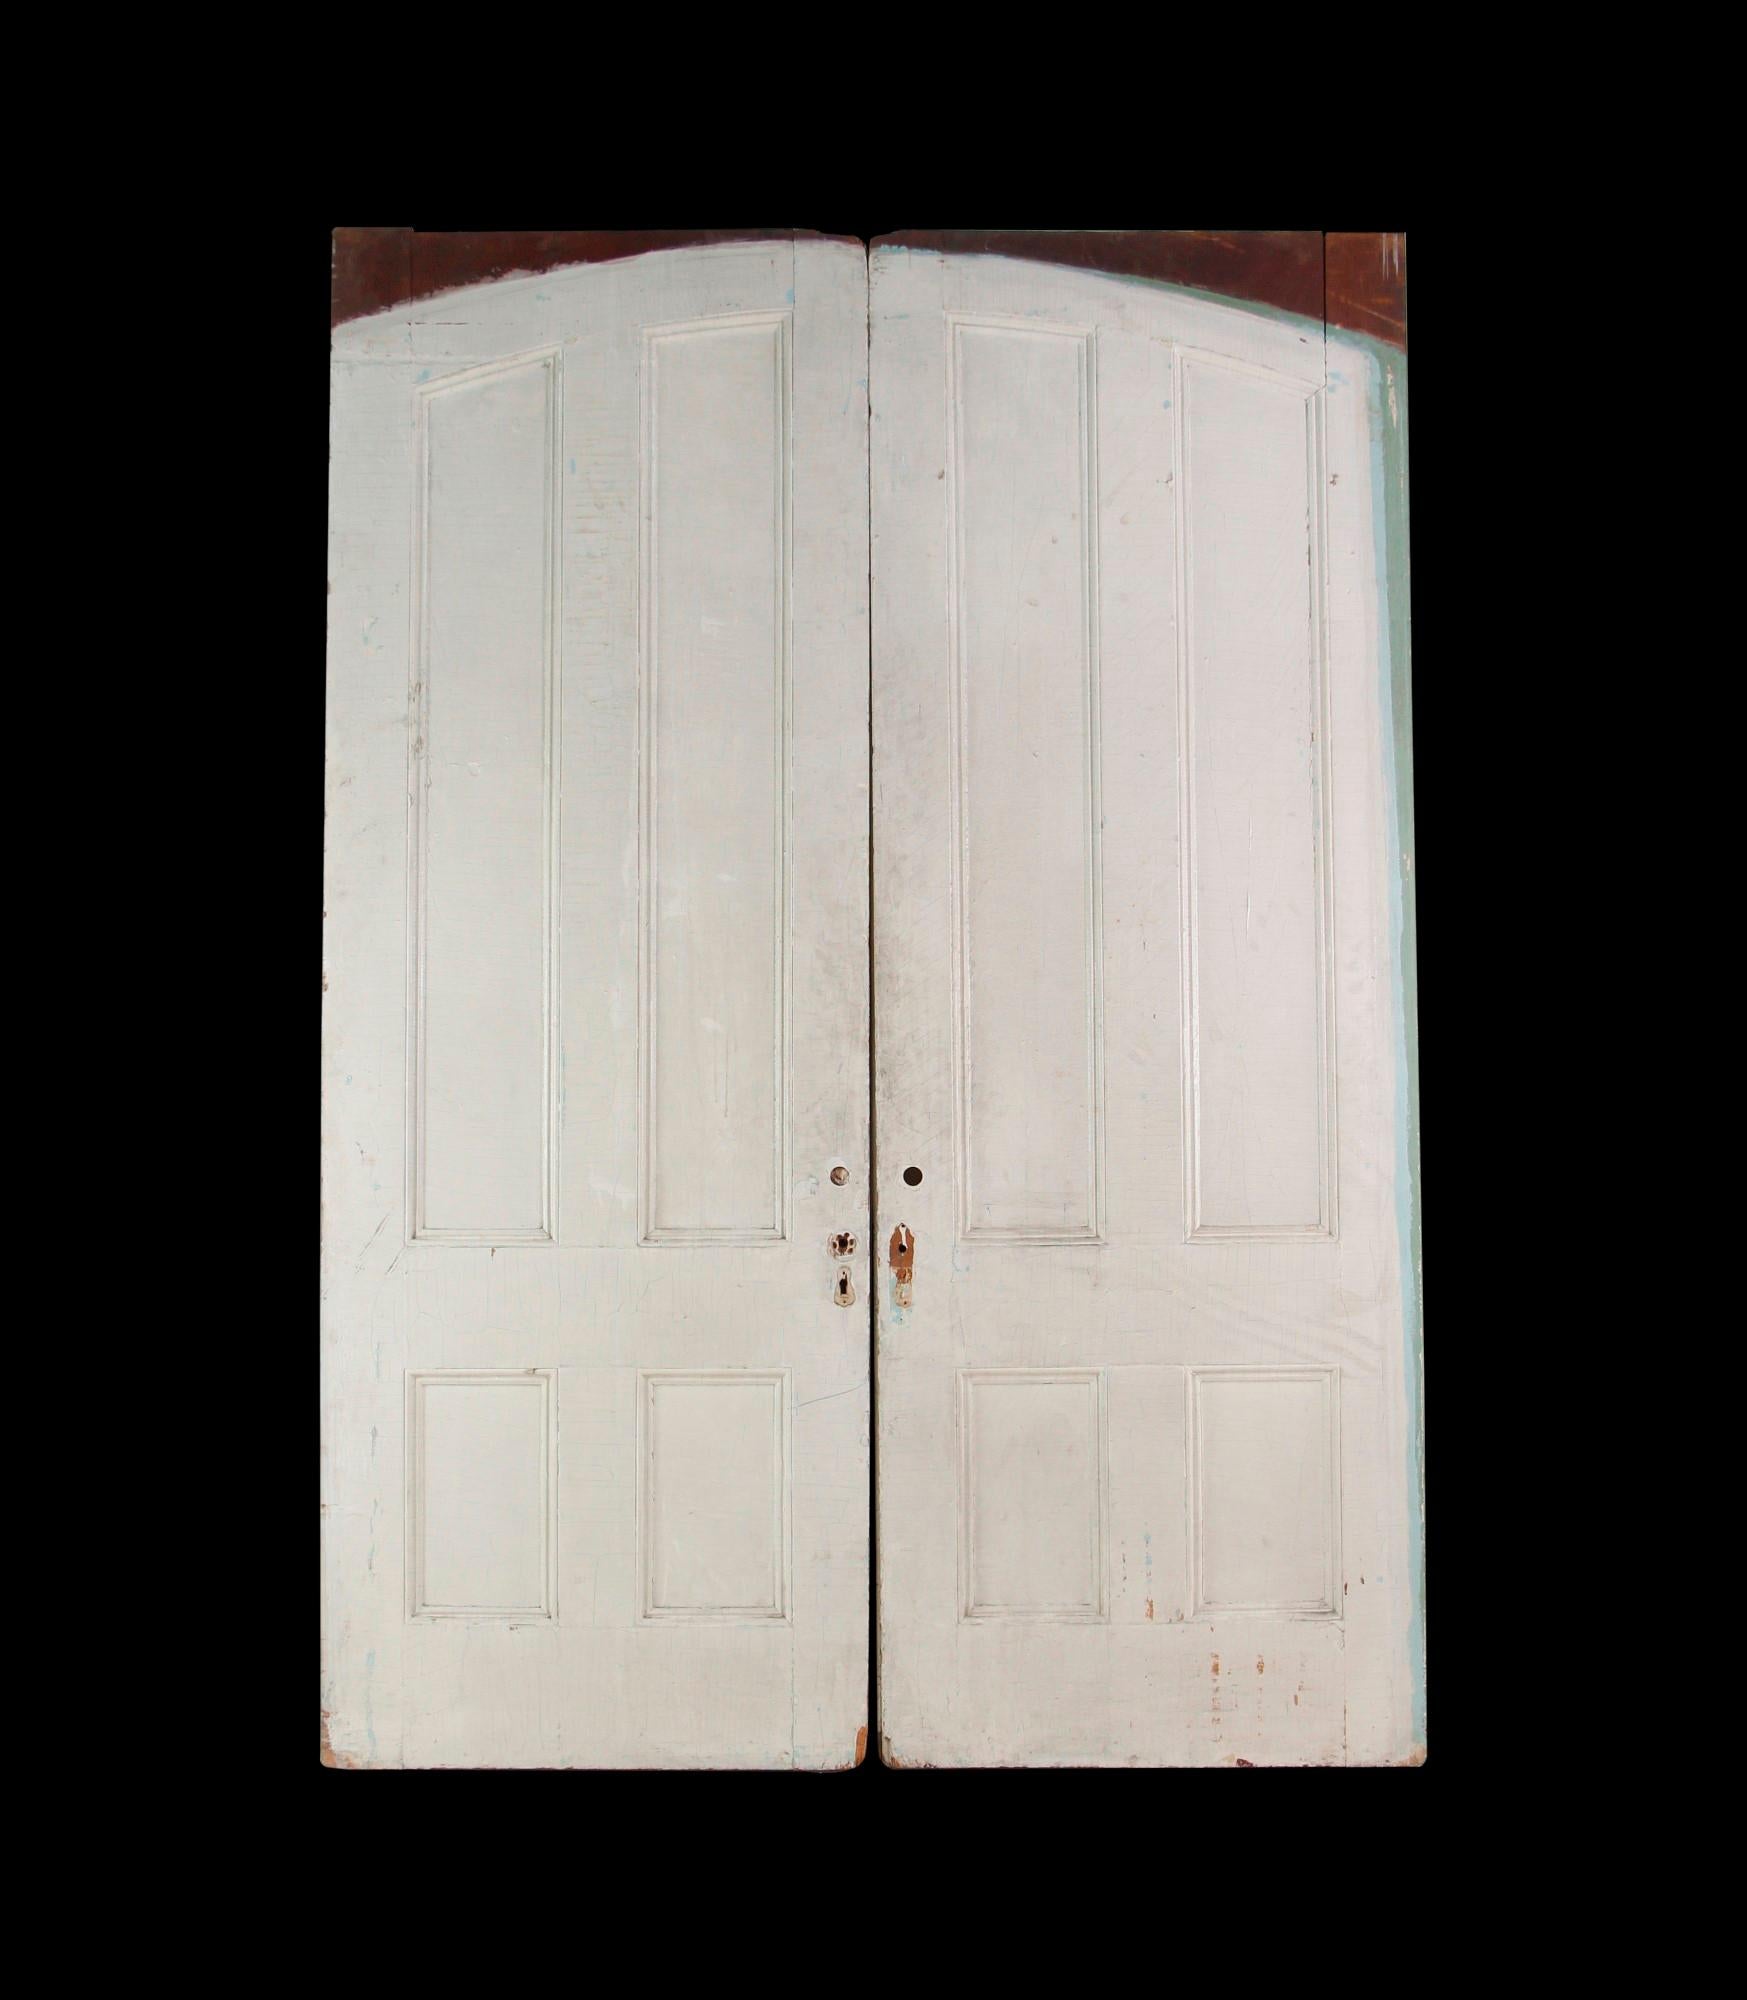 These early 1900's wood pocket doors have four vertical panes and are painted white. They are priced as a double. This set can be seen at our 400 Gilligan St location in Scranton, PA. Measures: 103 x 72.5.